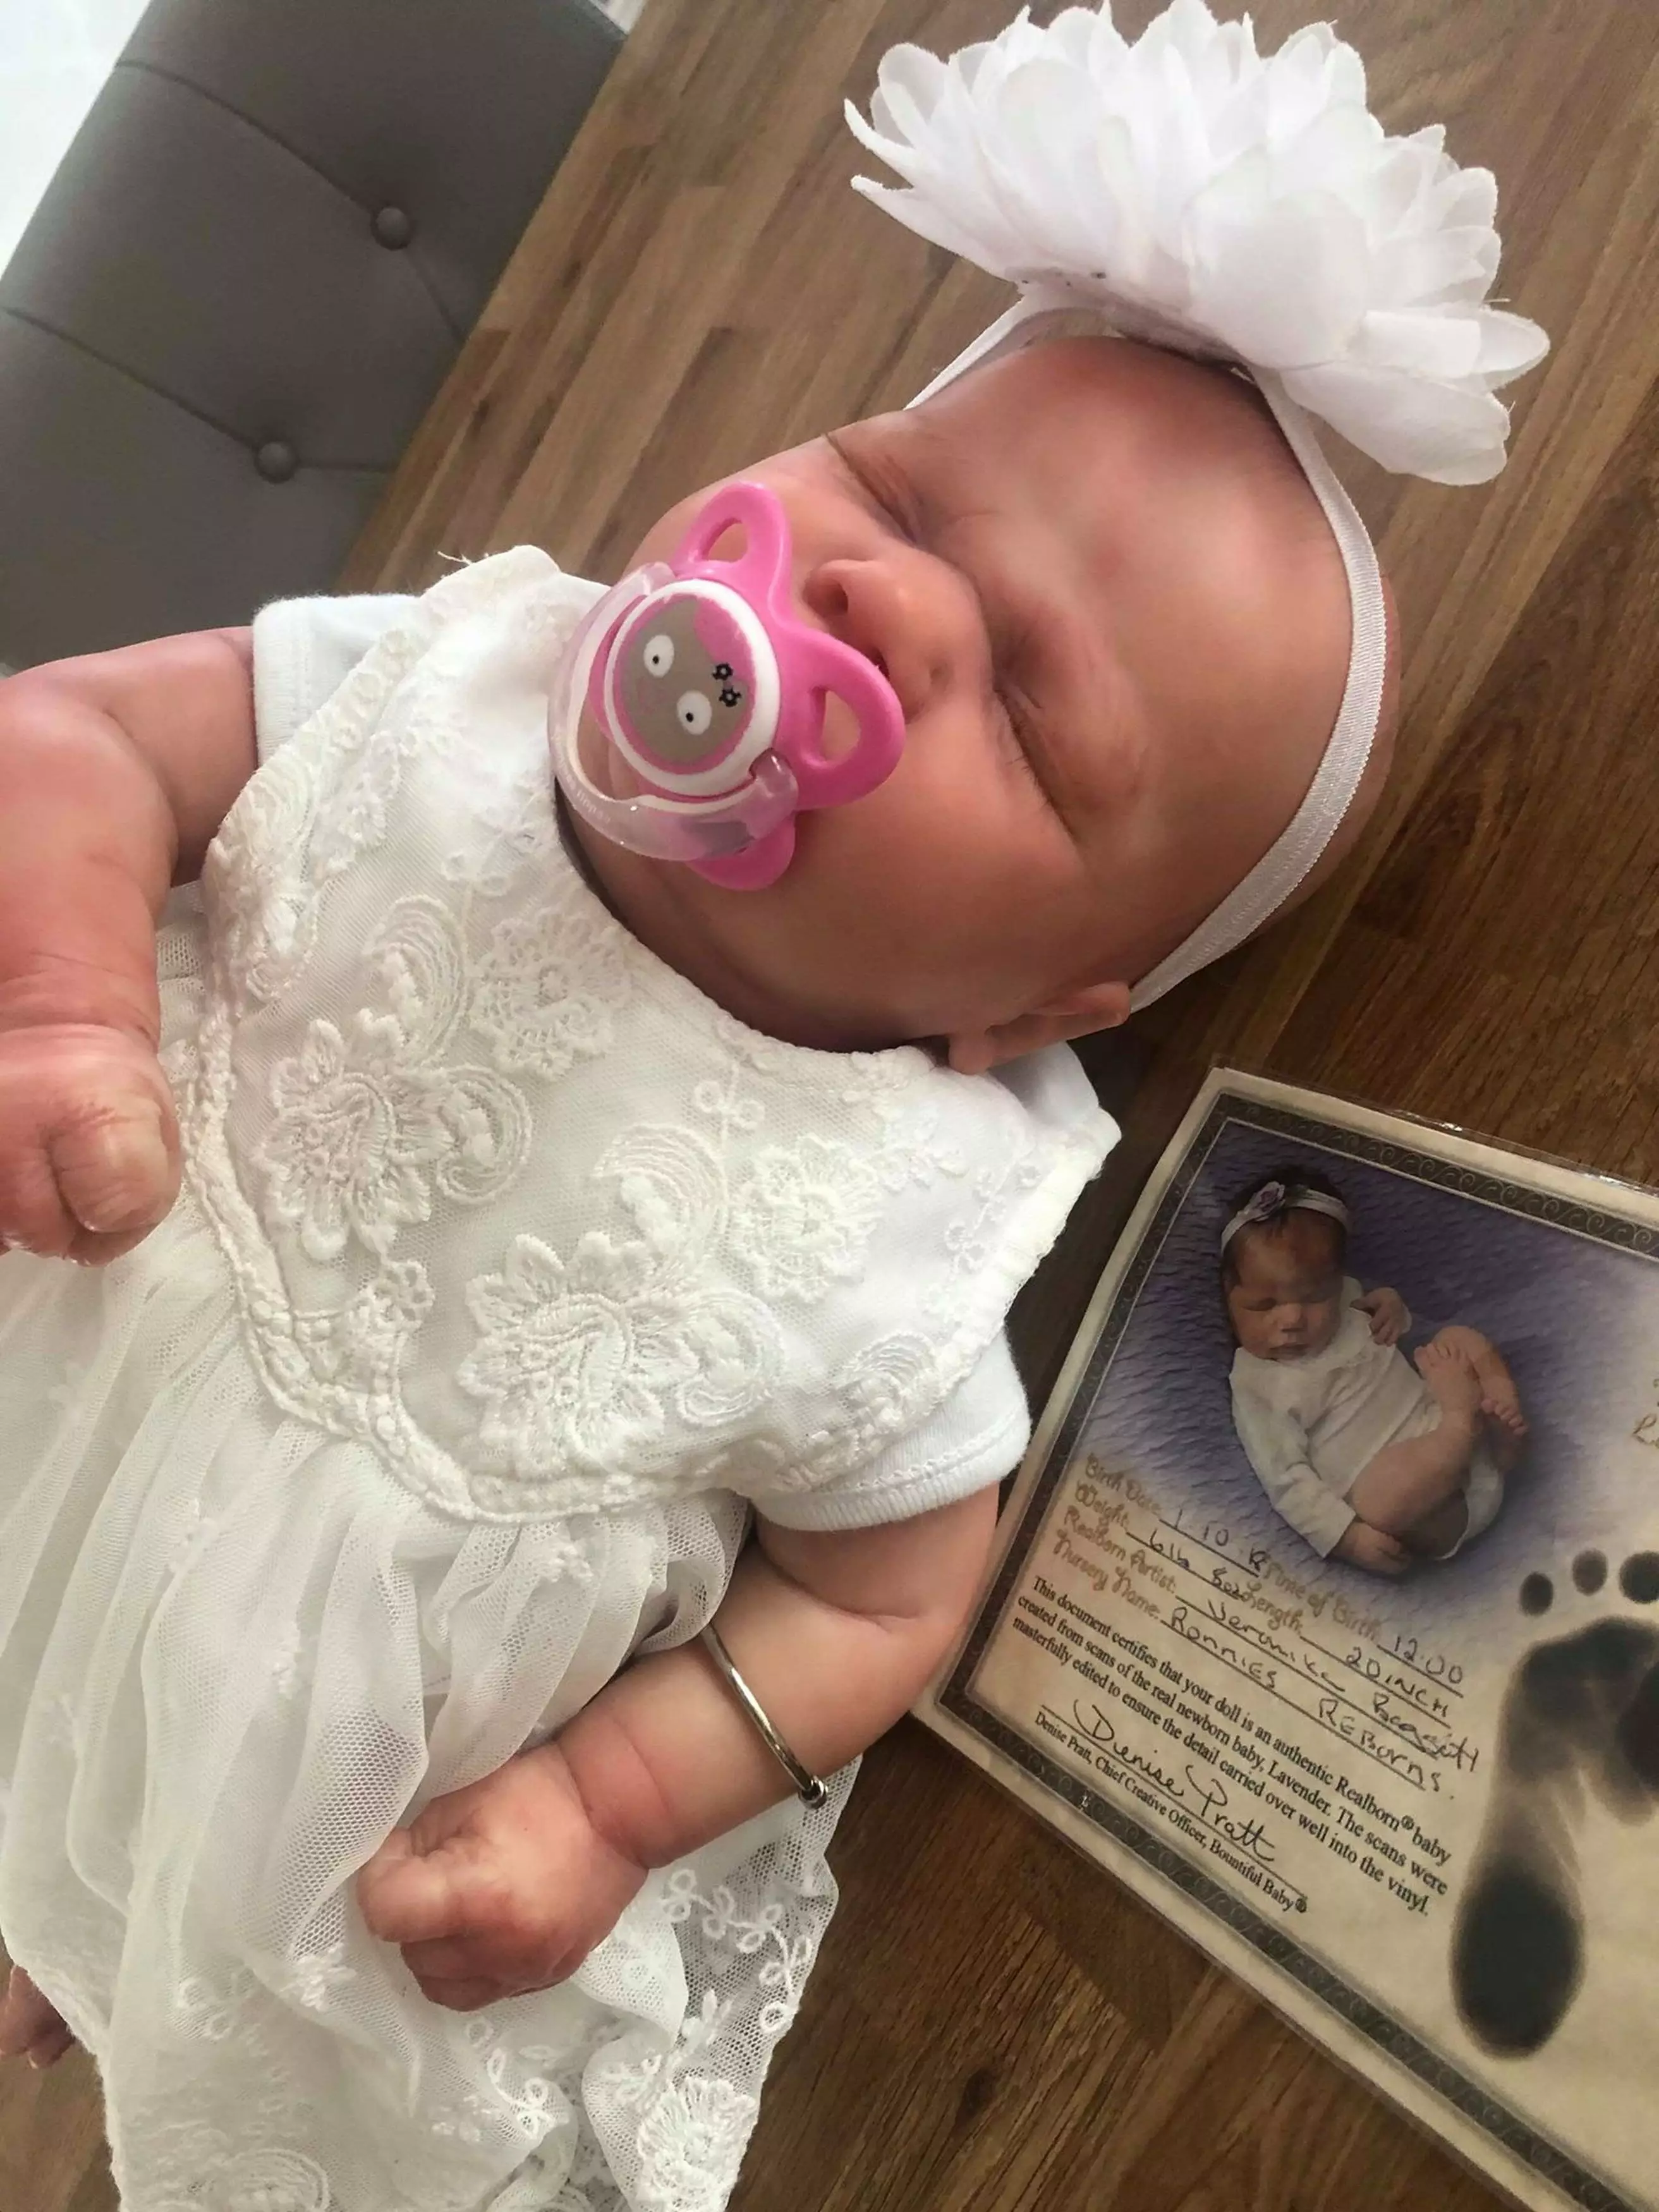 The Reborn Doll is still for sale on Facebook Marketplace